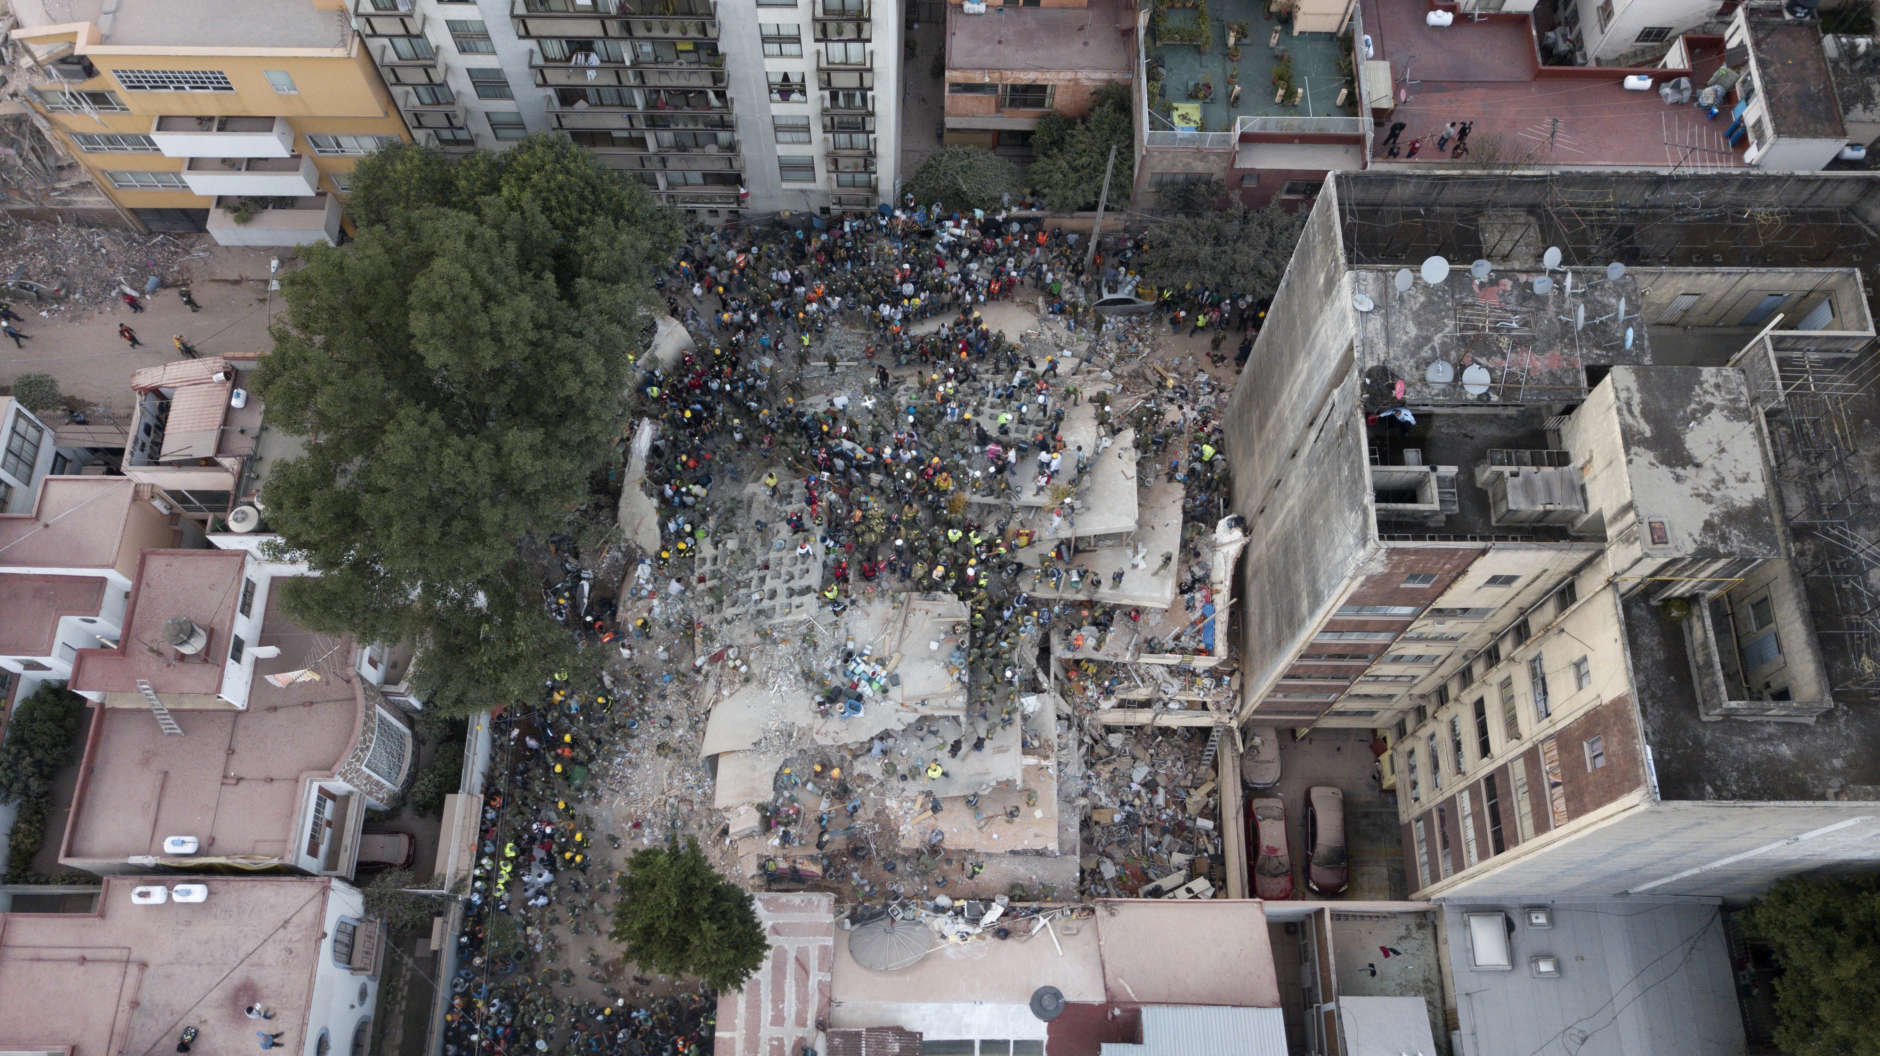 Rescue workers and volunteers search for survivors on a collapsed building the Del Valle neighborhood in Mexico City, Tuesday Sept. 19, 2017. A magnitude 7.1 earthquake has stunned central Mexico, killing more than 100 people as buildings collapsed in plumes of dust. (AP Photo/Miguel Tovar)